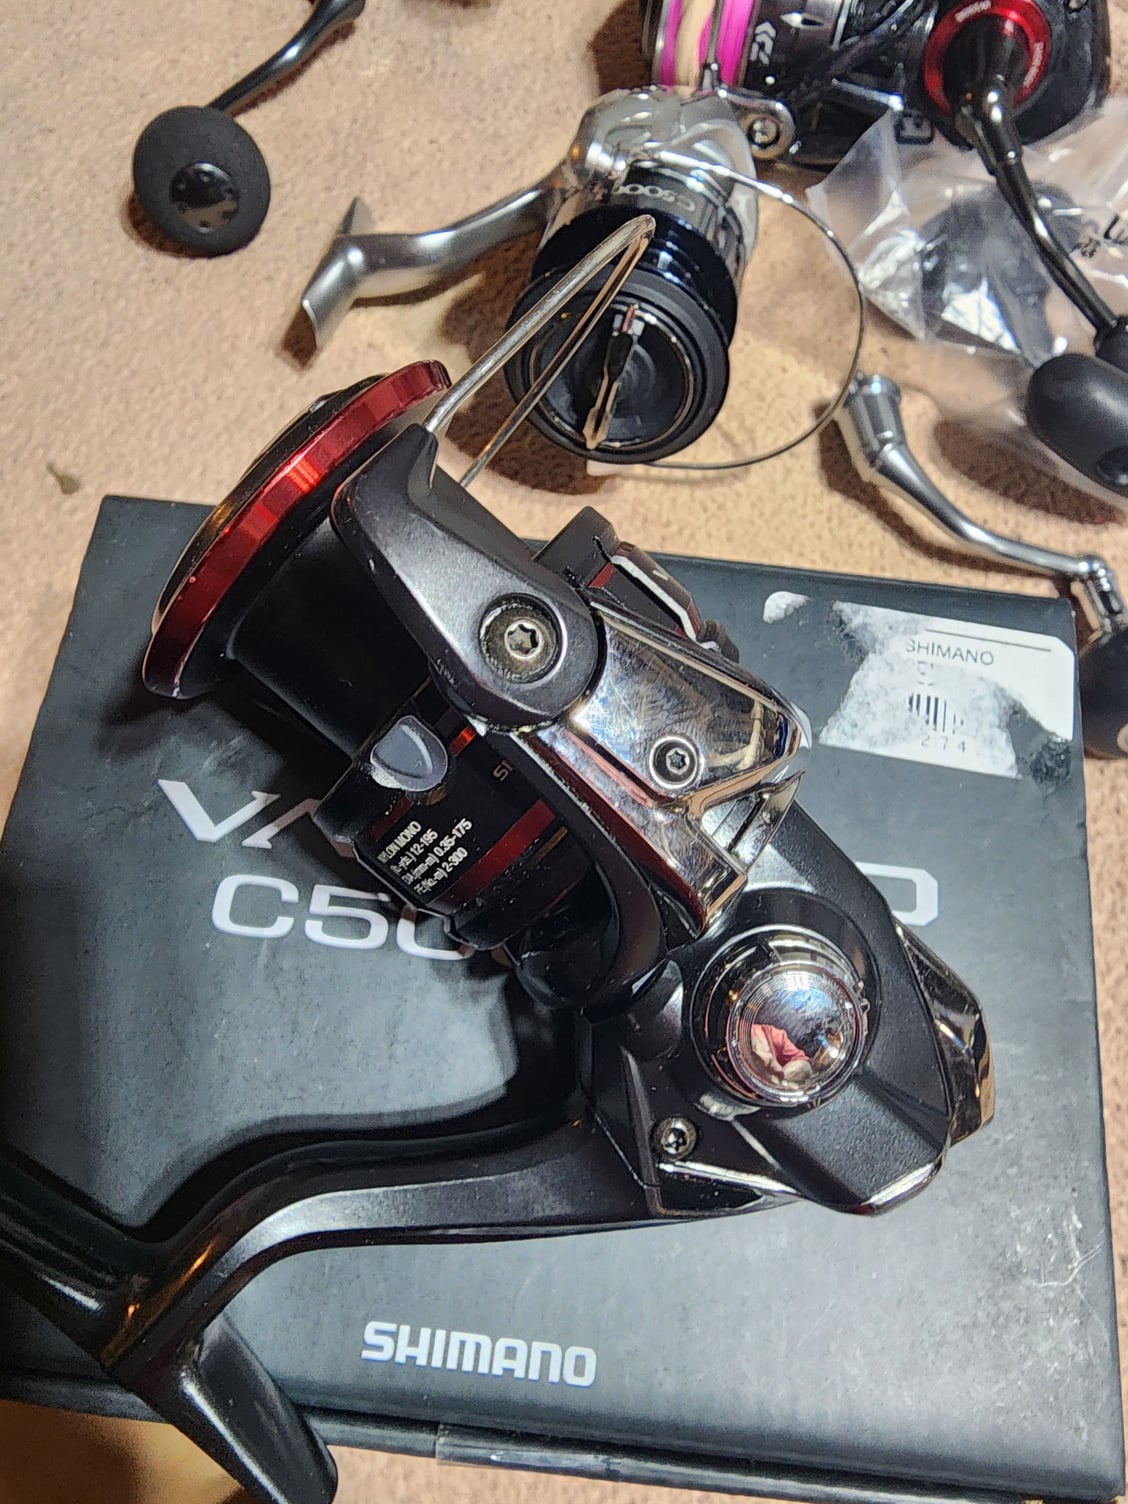 Shimano vanford 5000 spinning Reel - The Hull Truth - Boating and